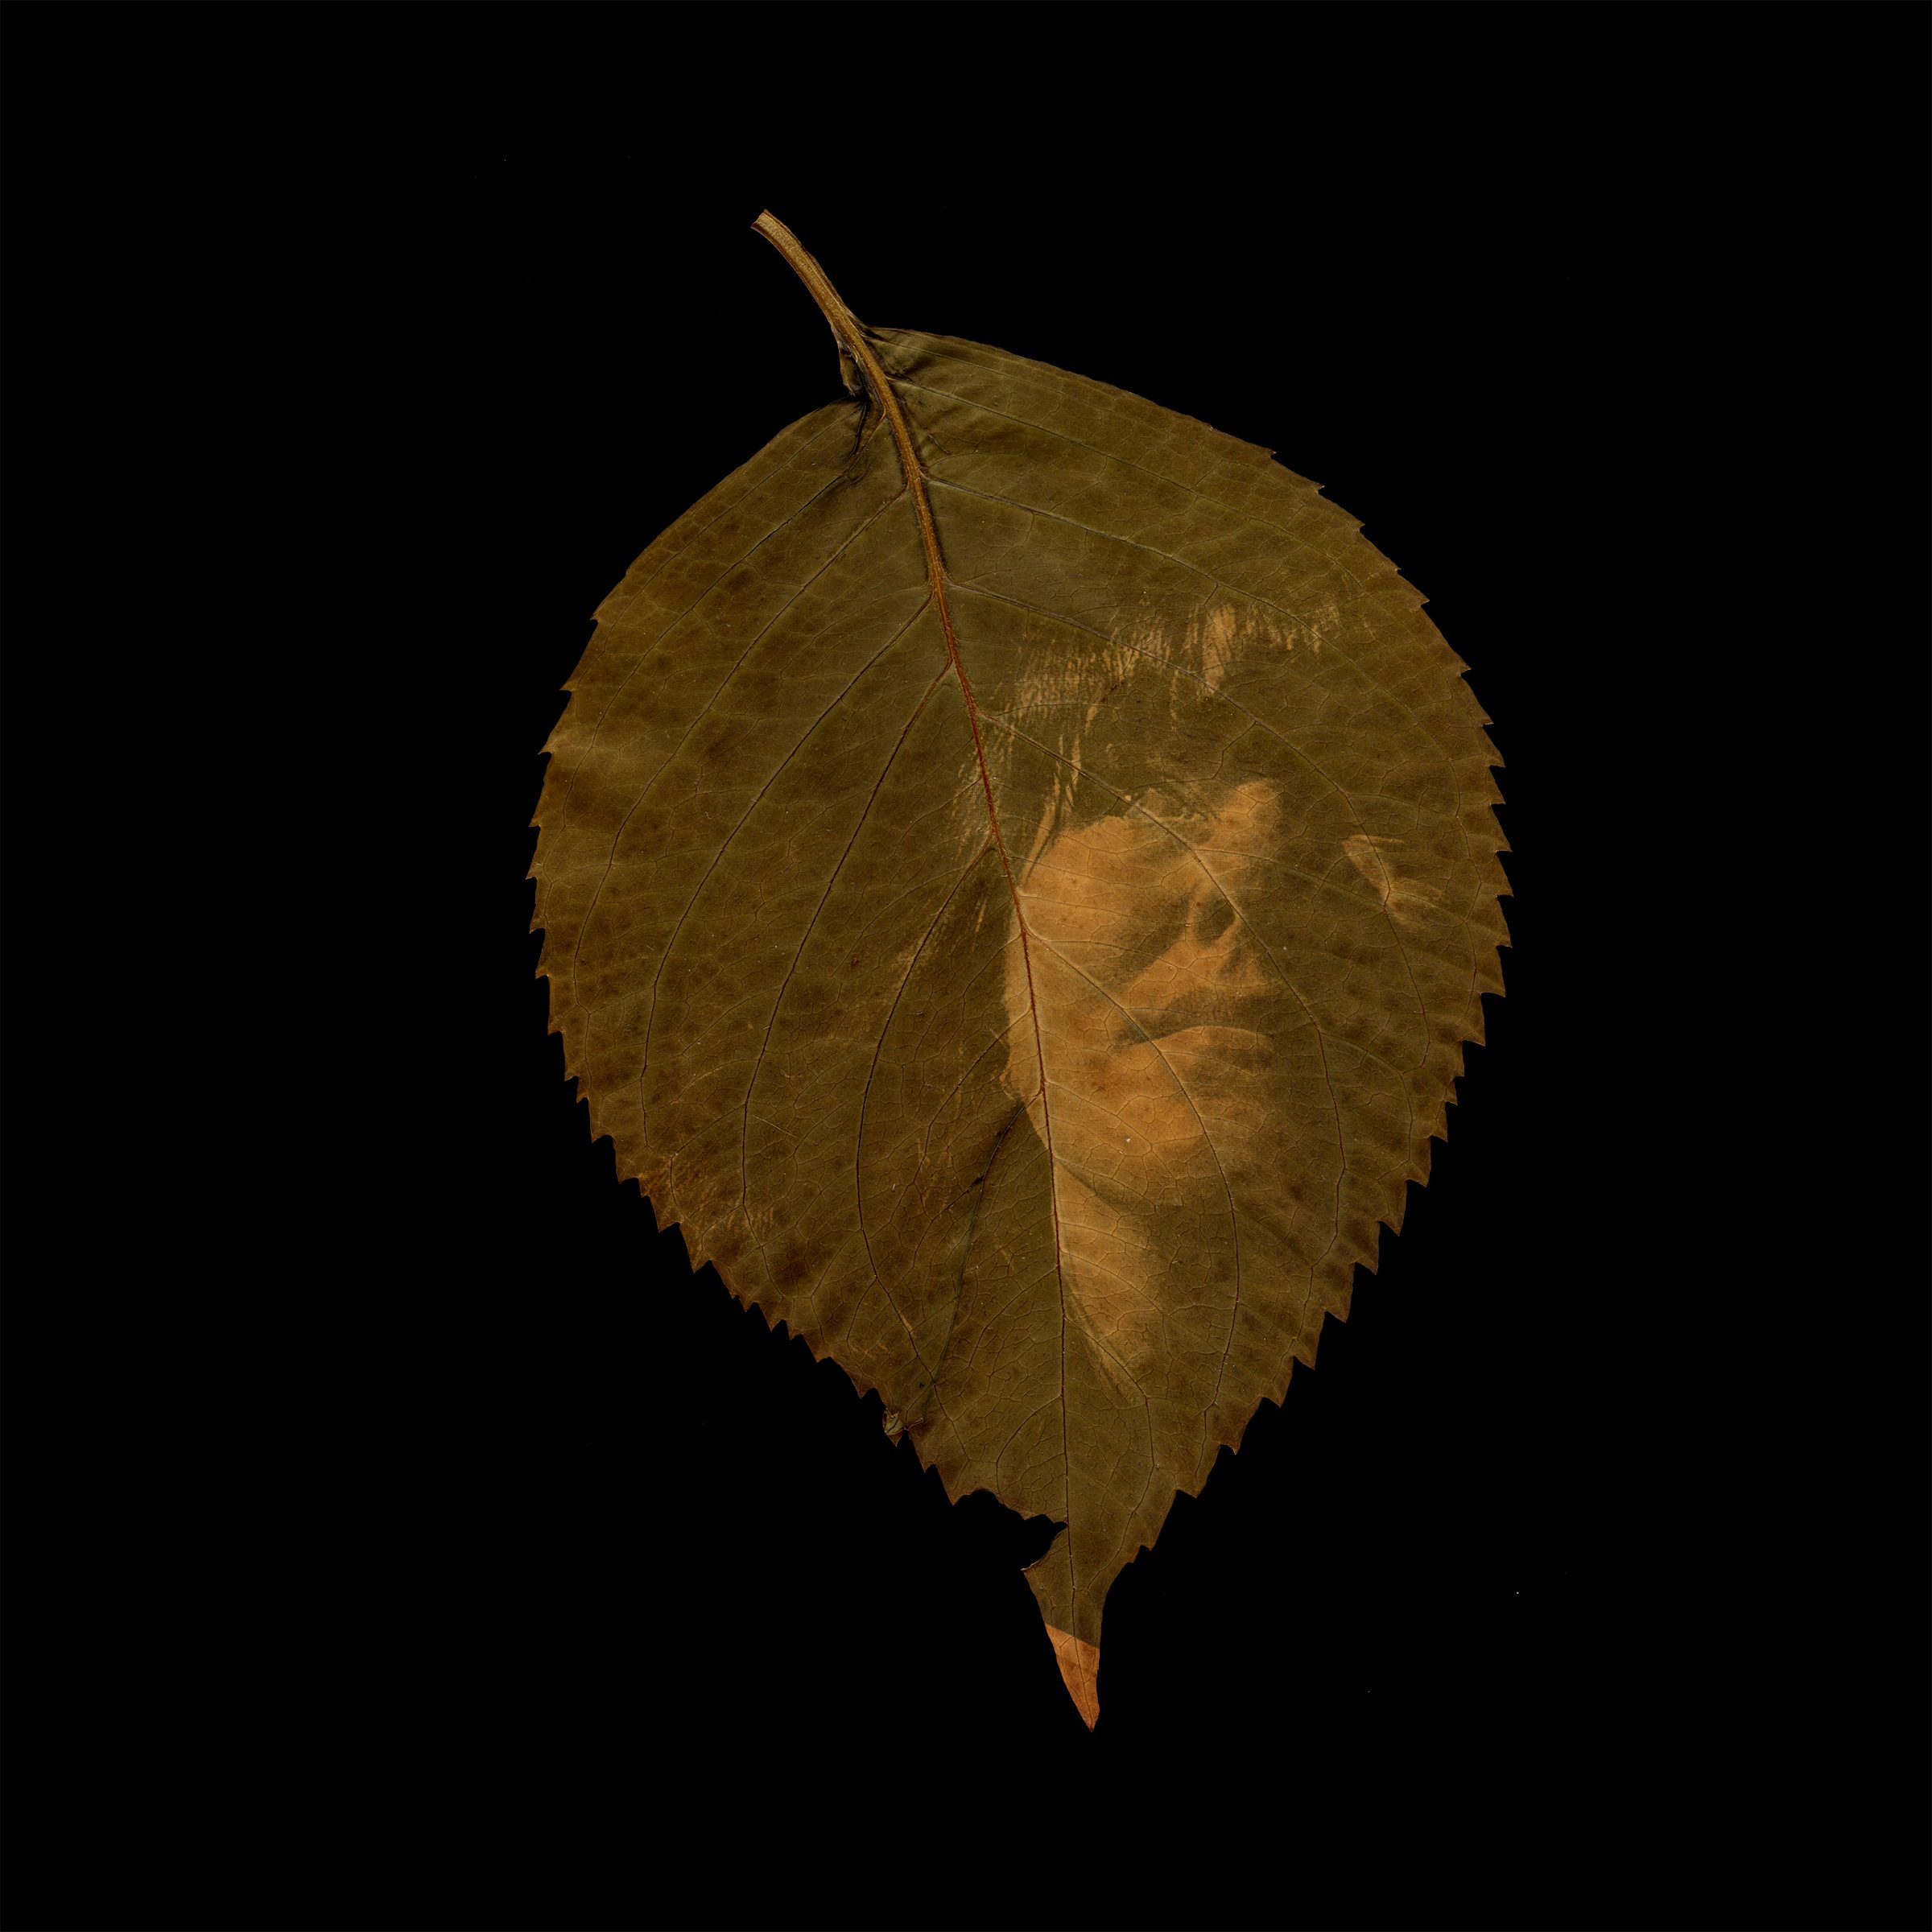 A round brown hydrangea leaf on a black background. Printed in the light umber chlorophyll is a self-portrait where half my face is lit by the sun and my head and eyes are tilted upward.